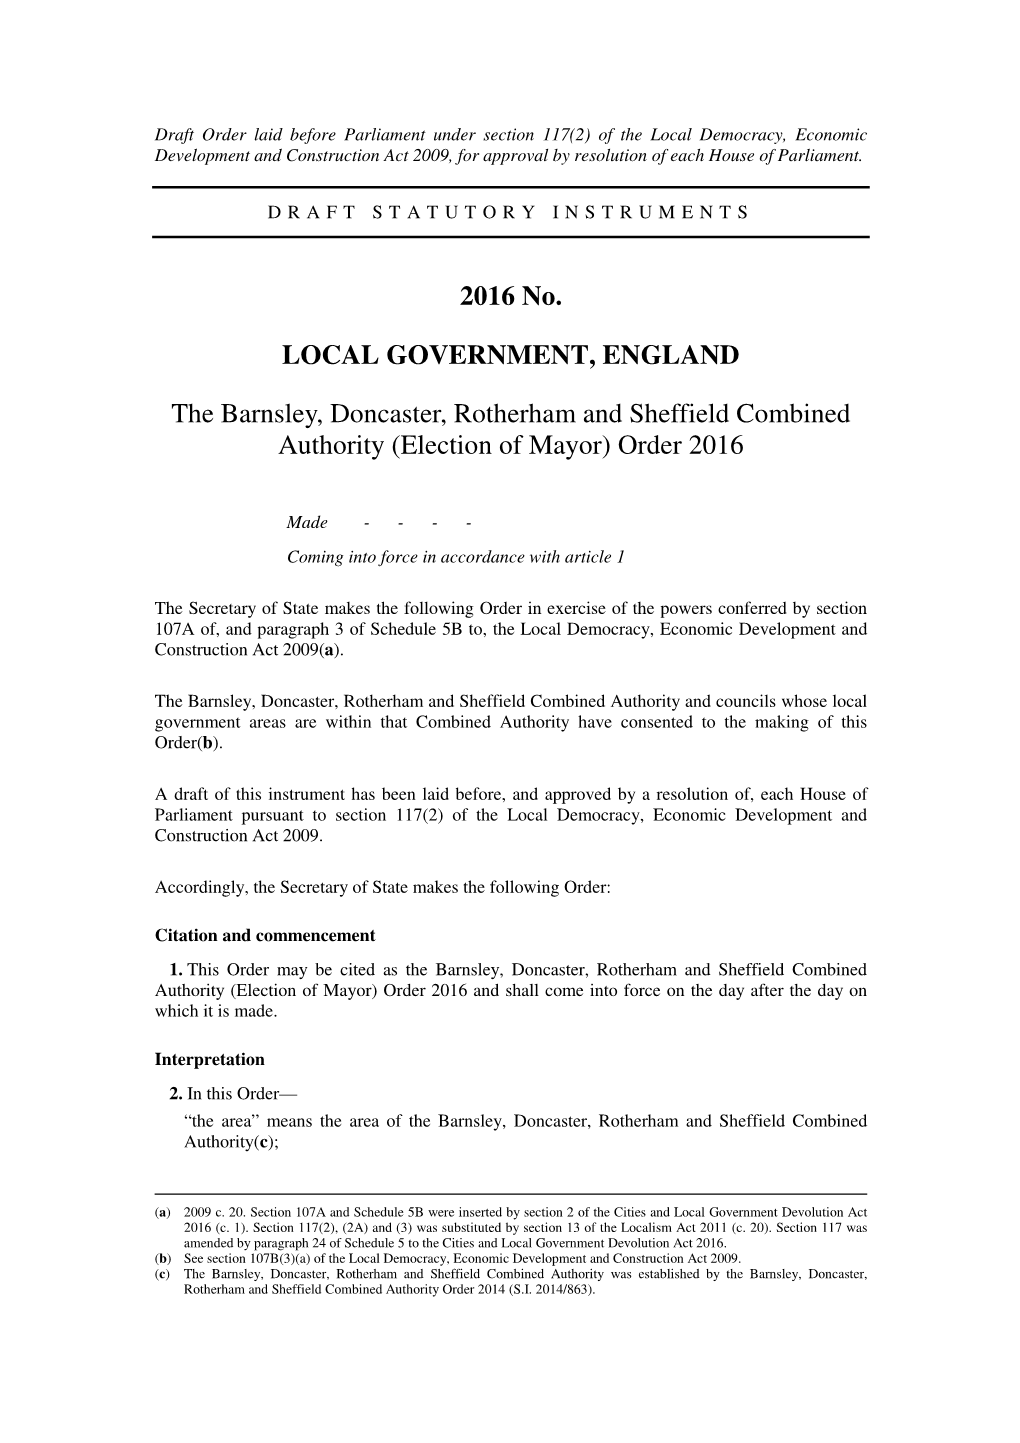 The Barnsley, Doncaster, Rotherham and Sheffield Combined Authority (Election of Mayor) Order 2016